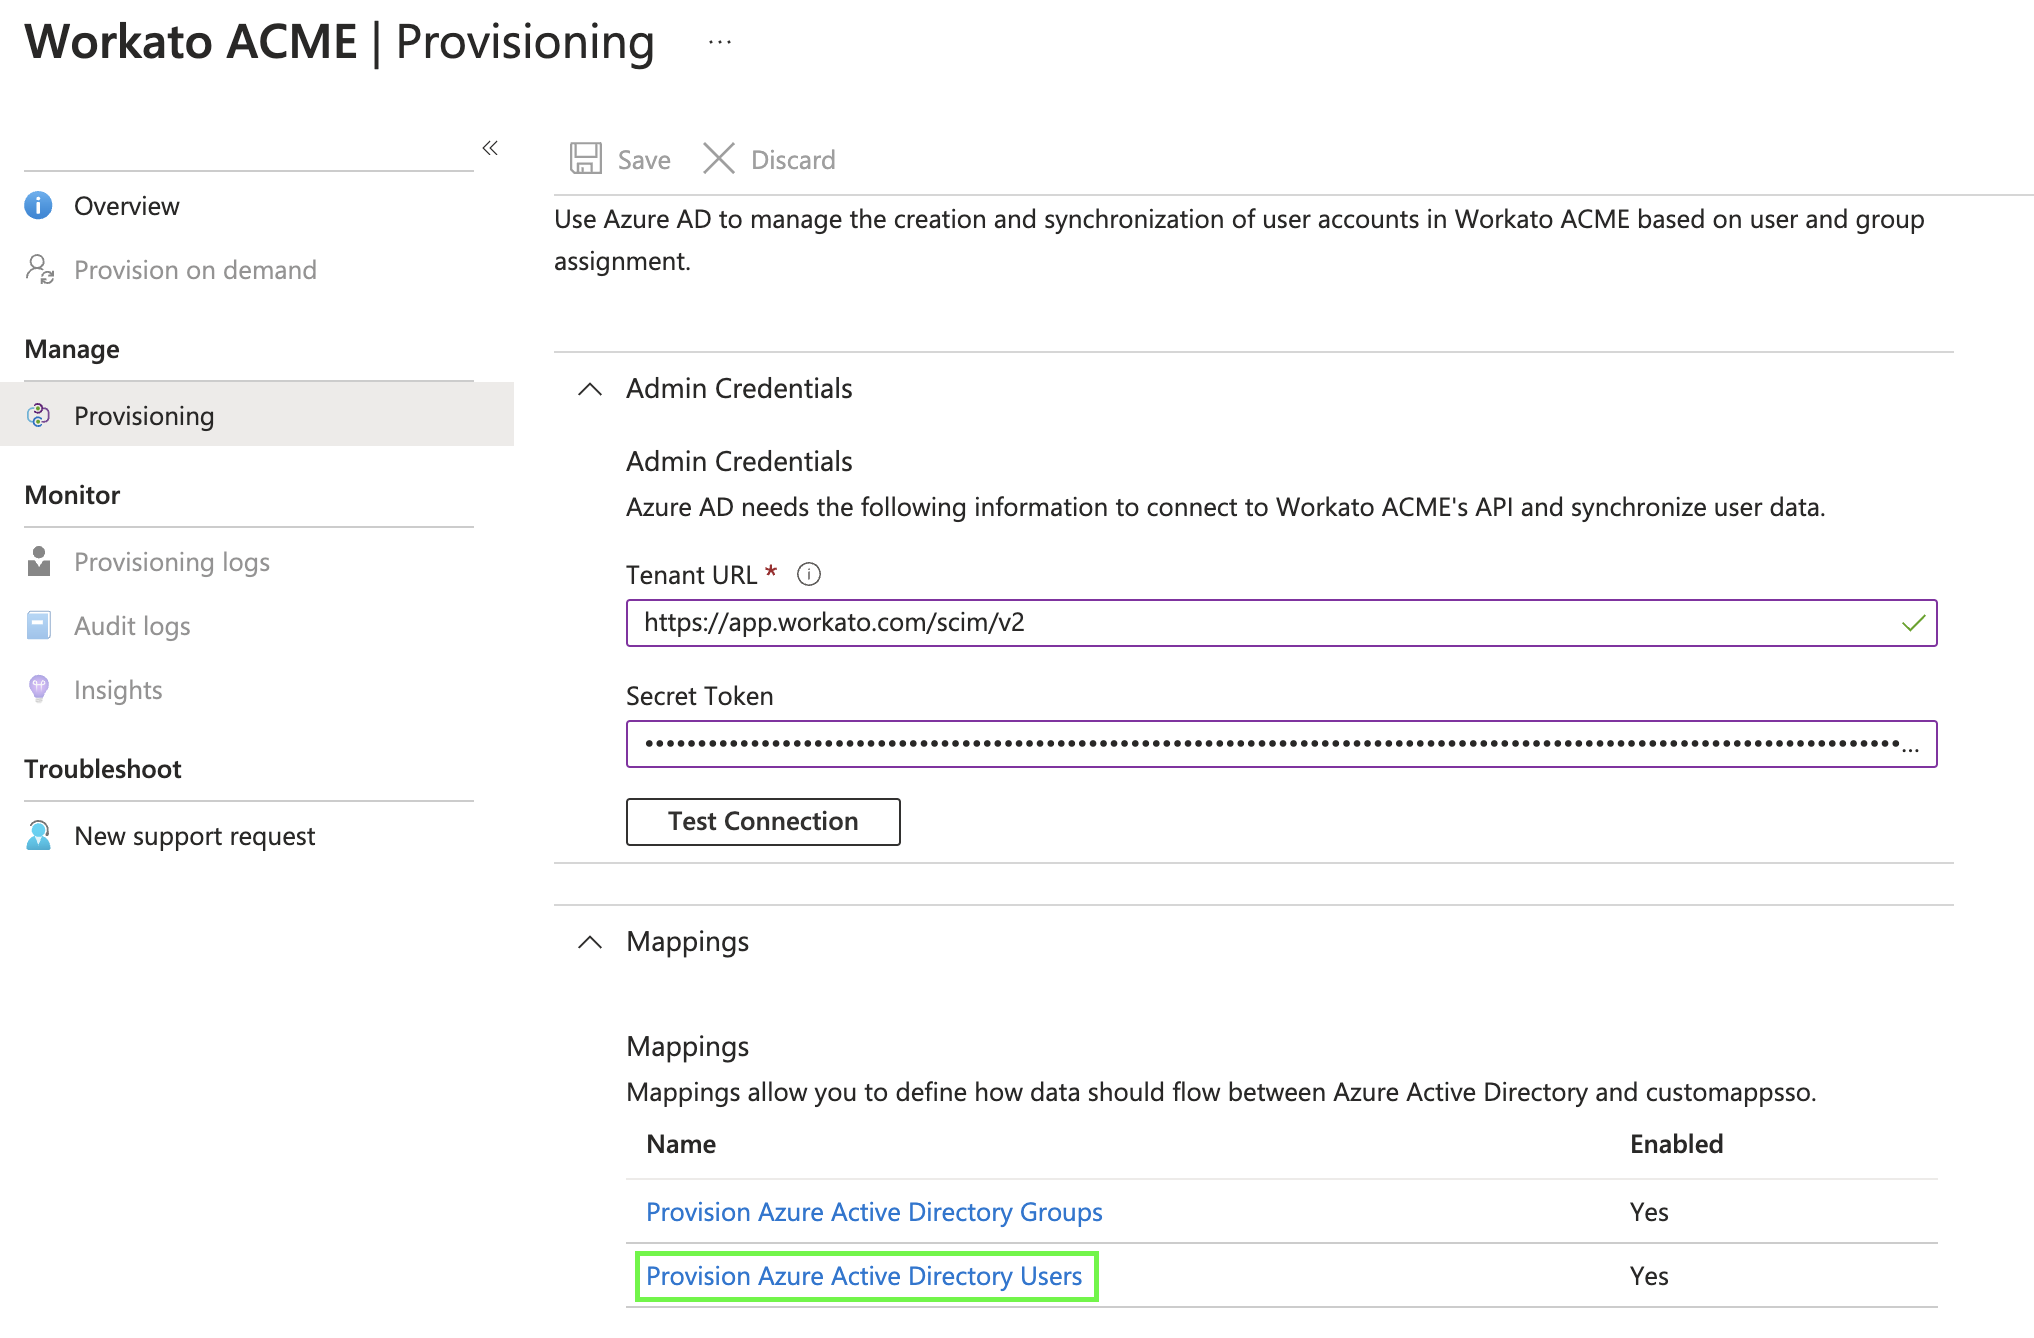 Provision Azure Active Directory Users setting